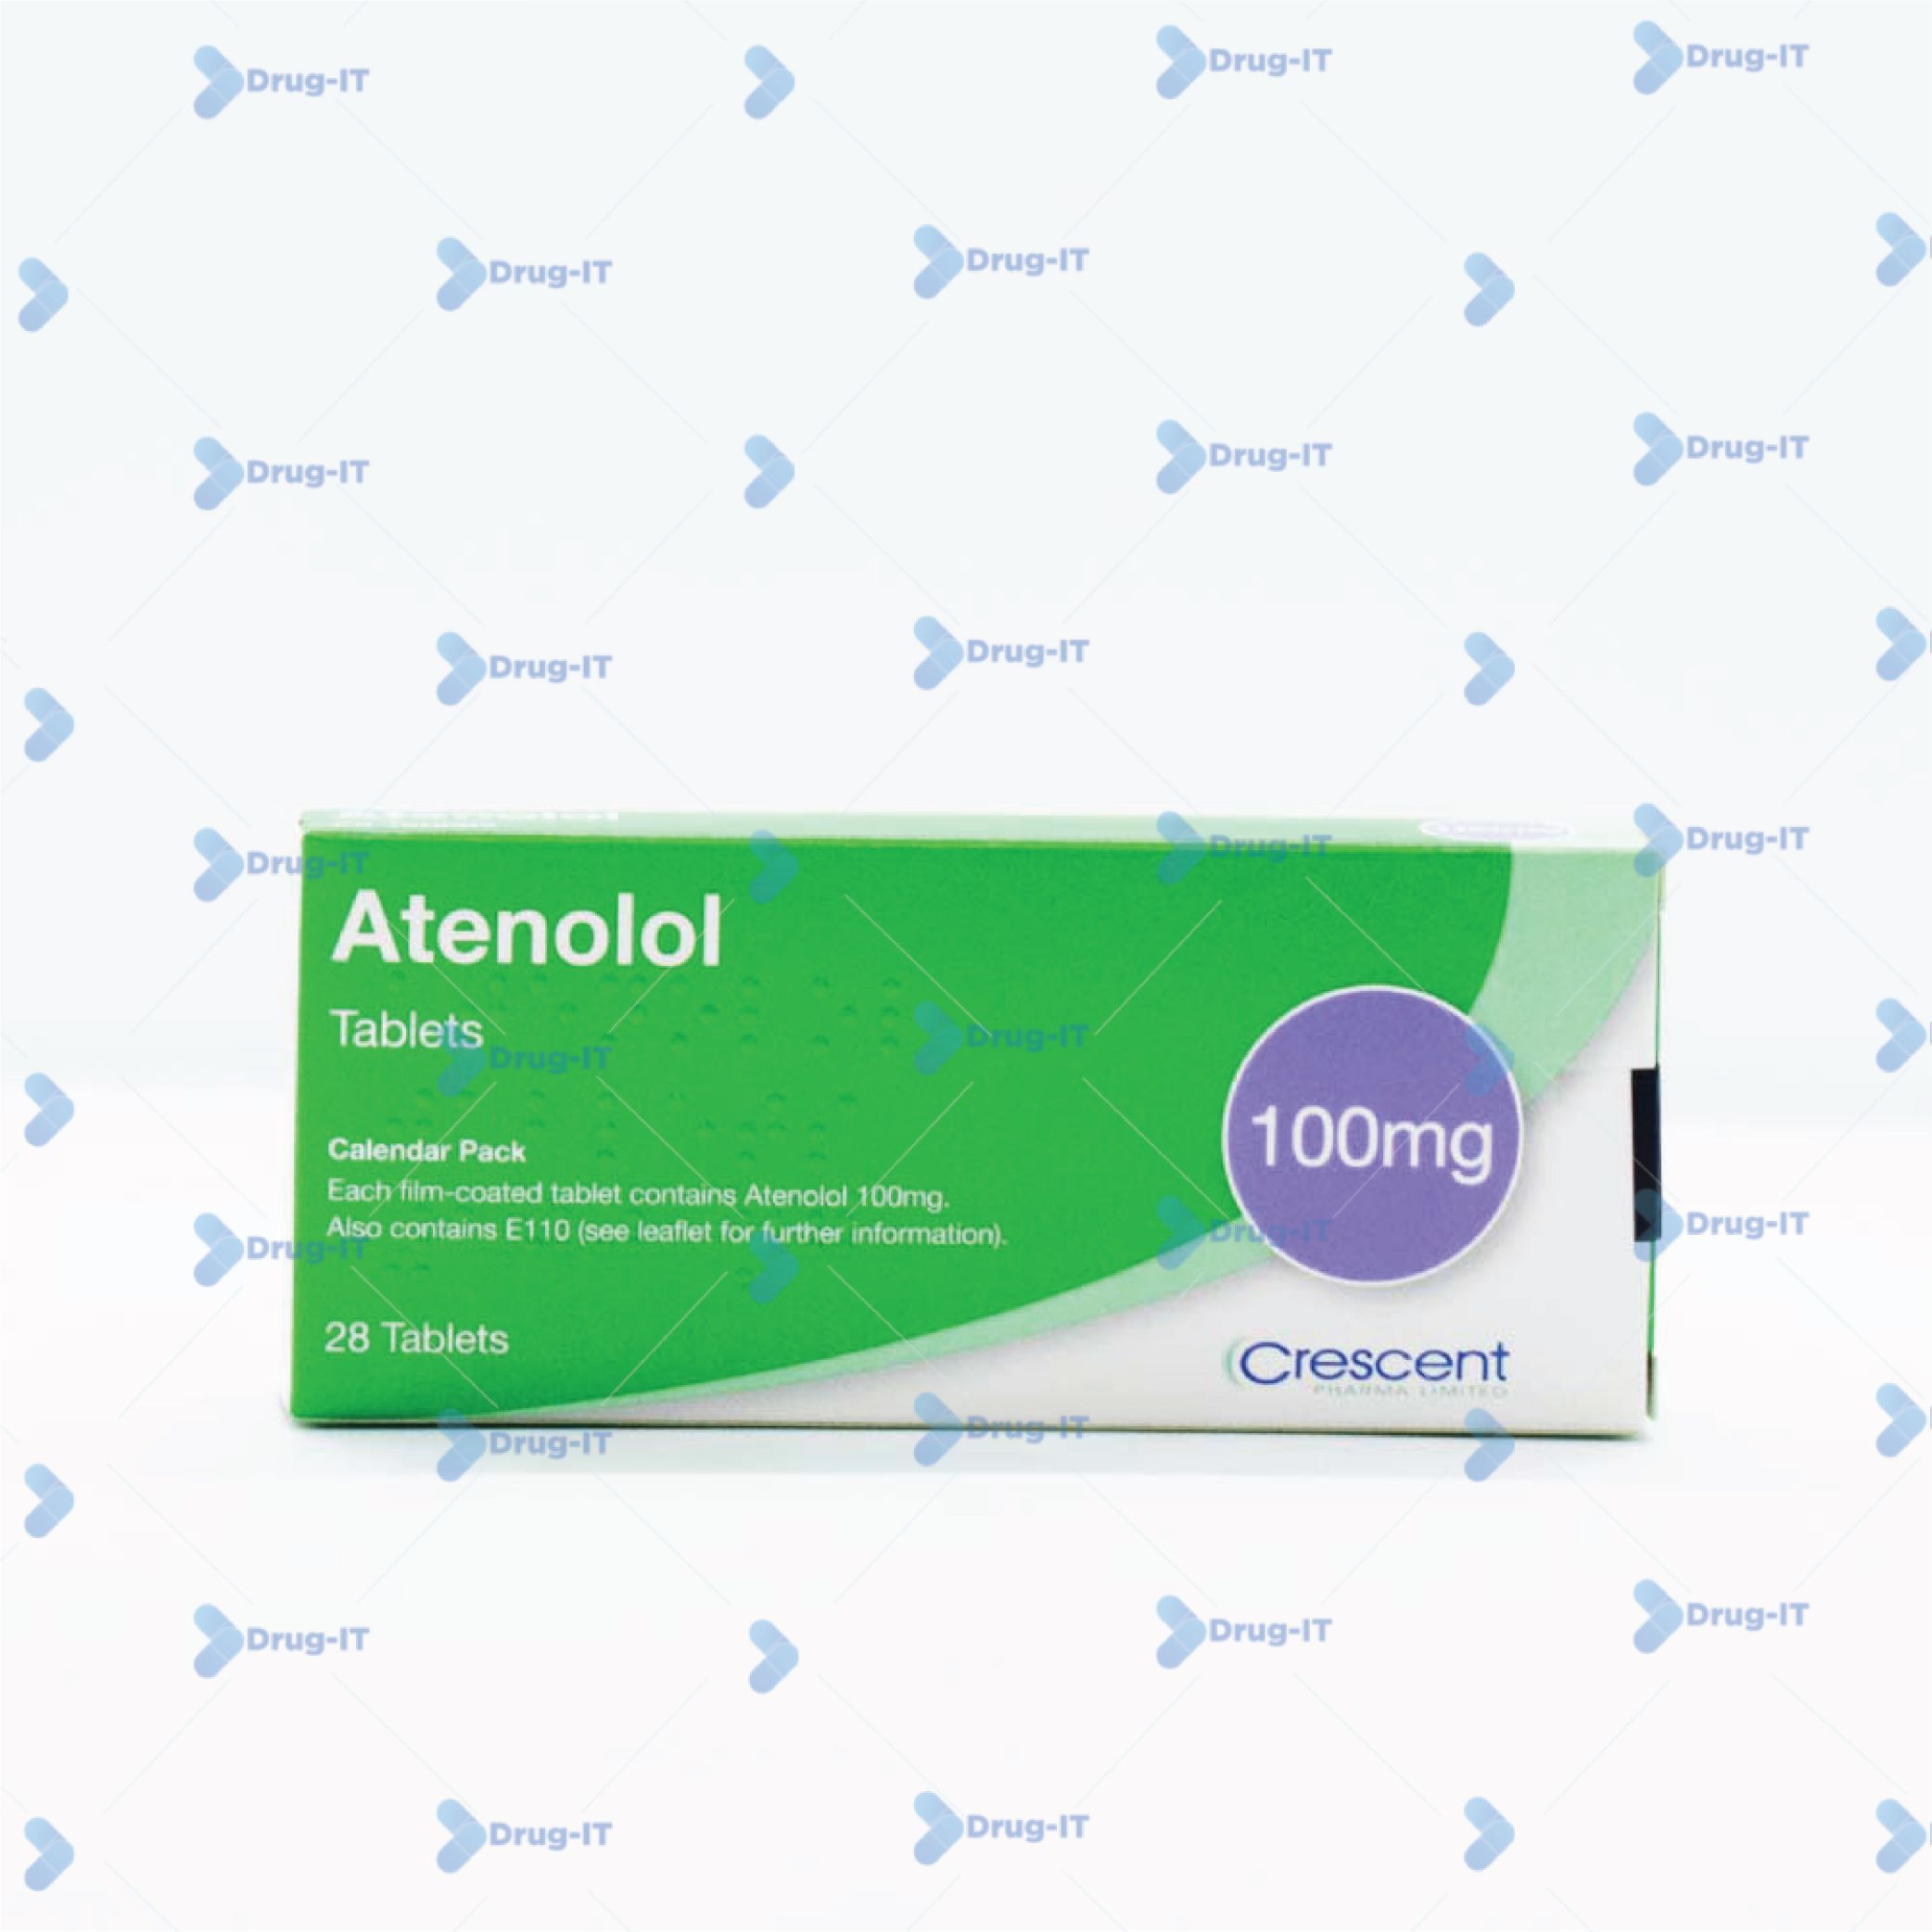 Atenolol 100mg Tablet (28 Tablets) by Crescent Pharma